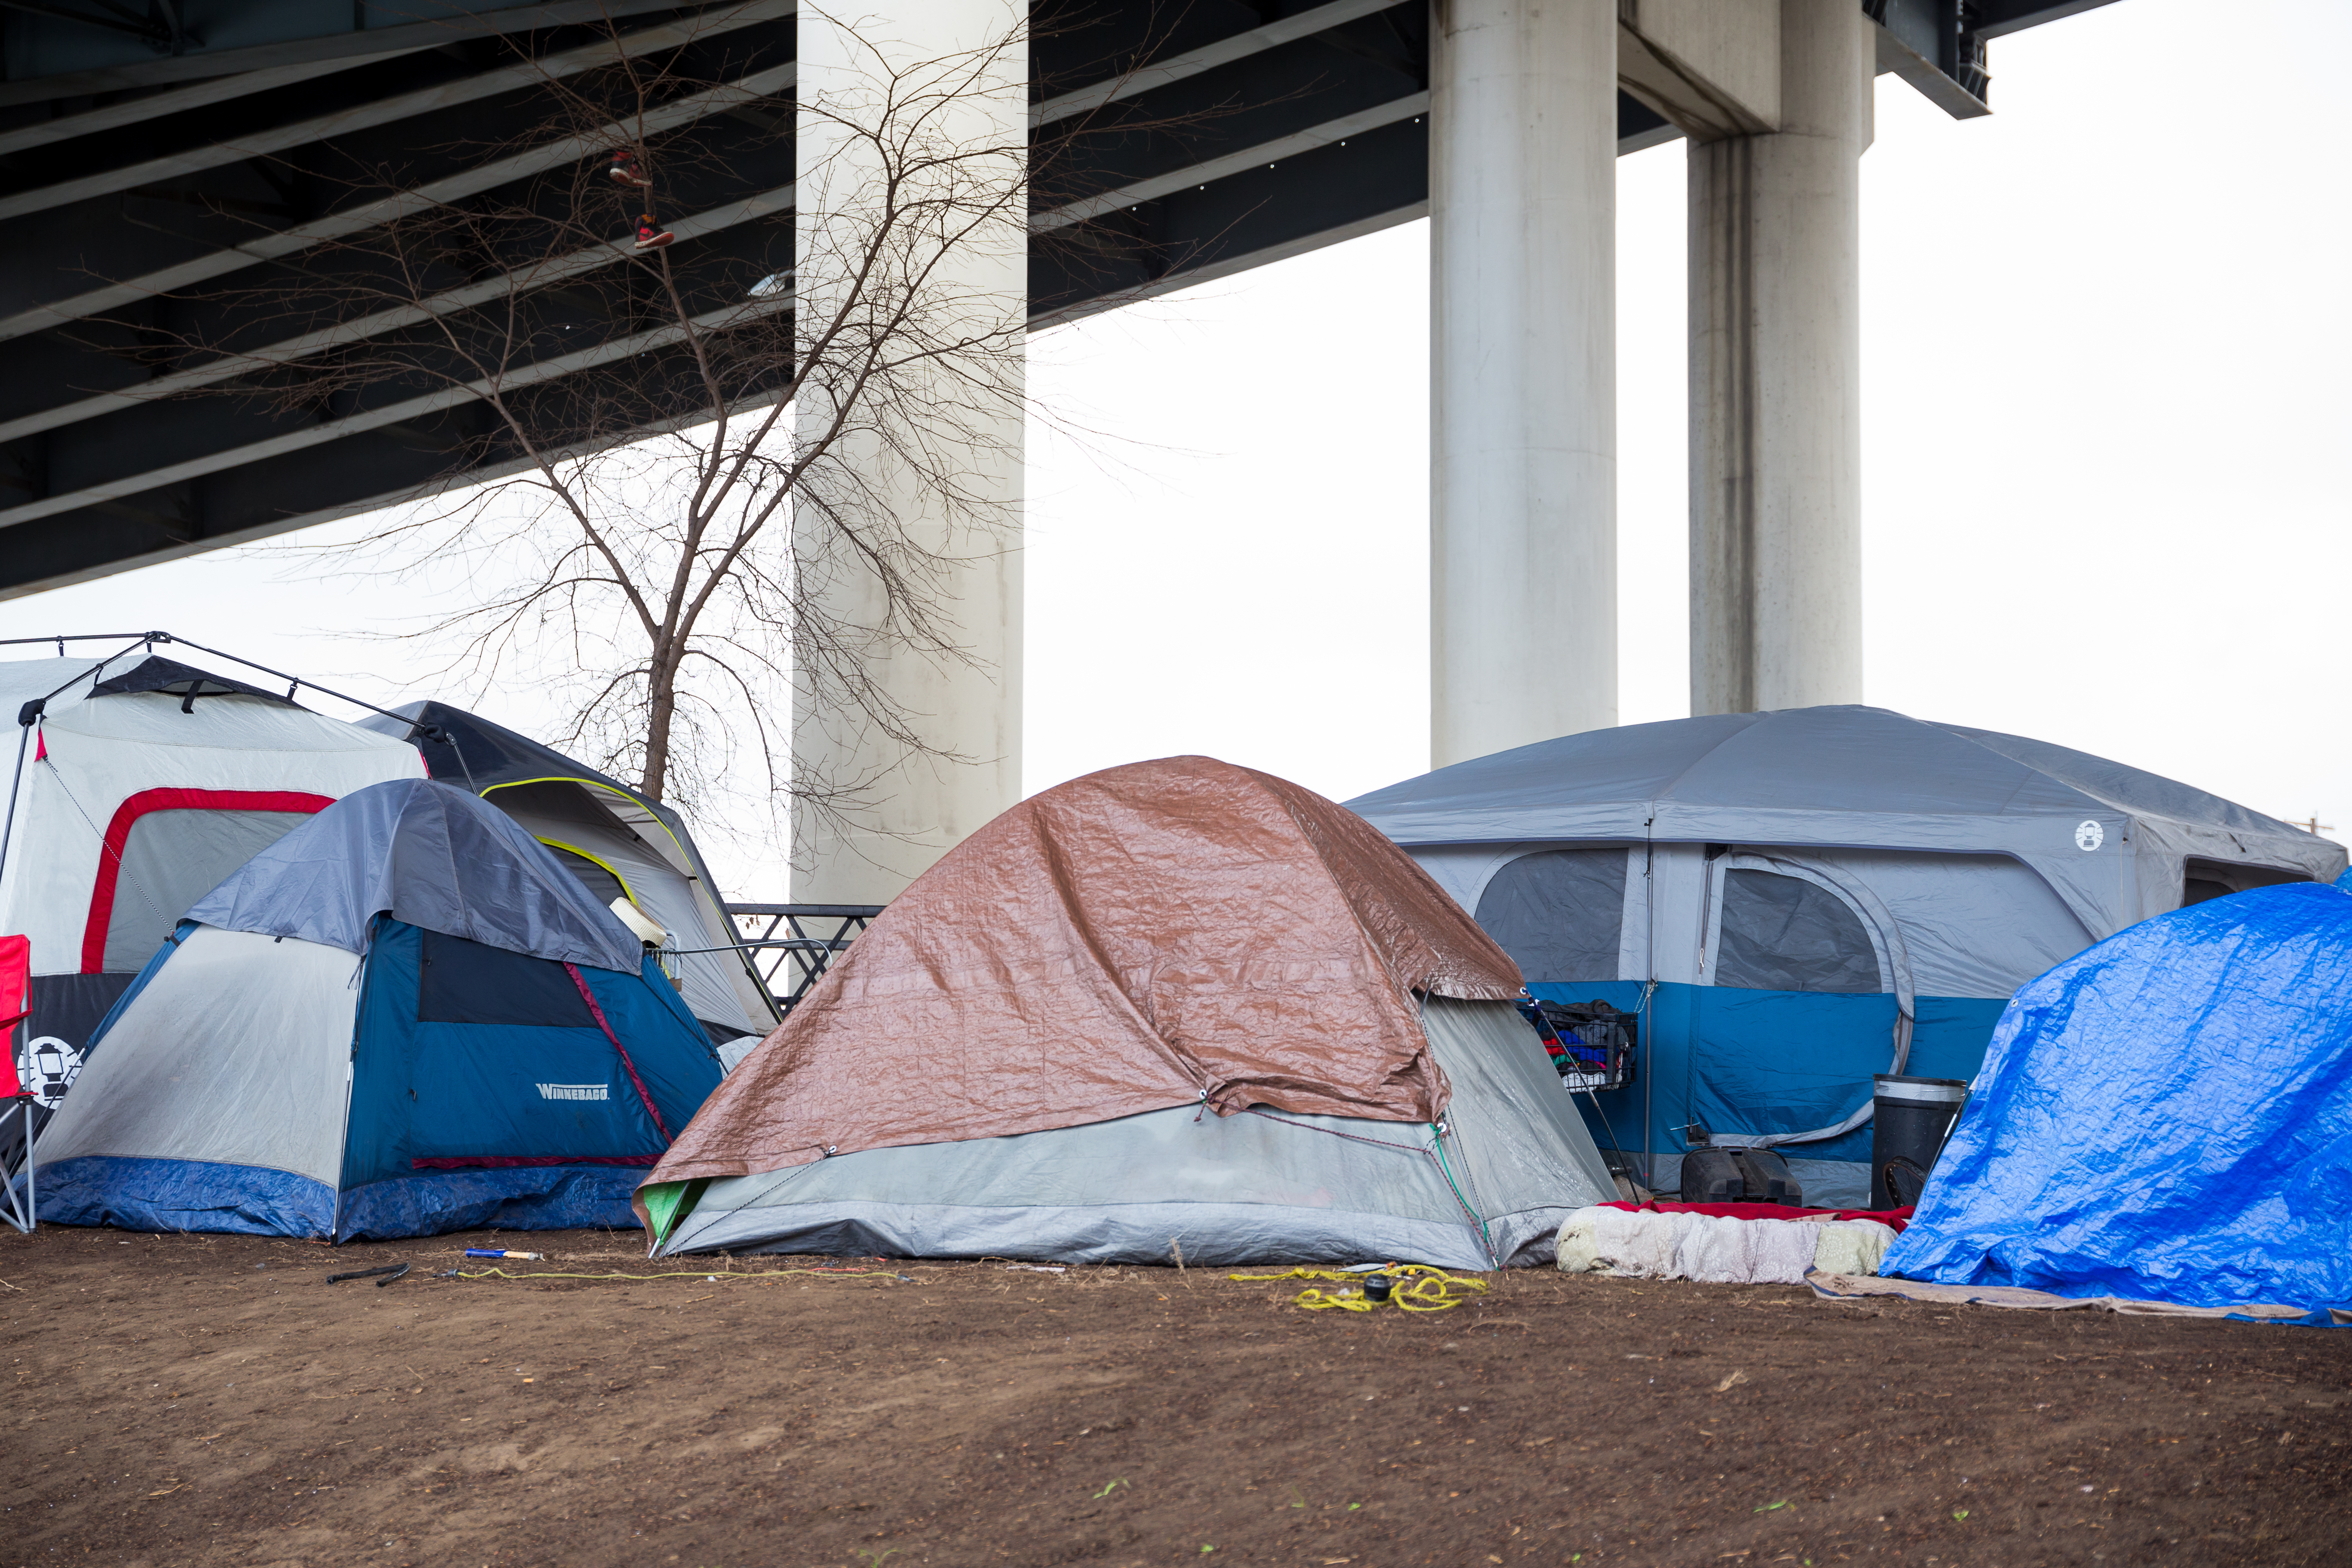 Several tents under a freeway overpass